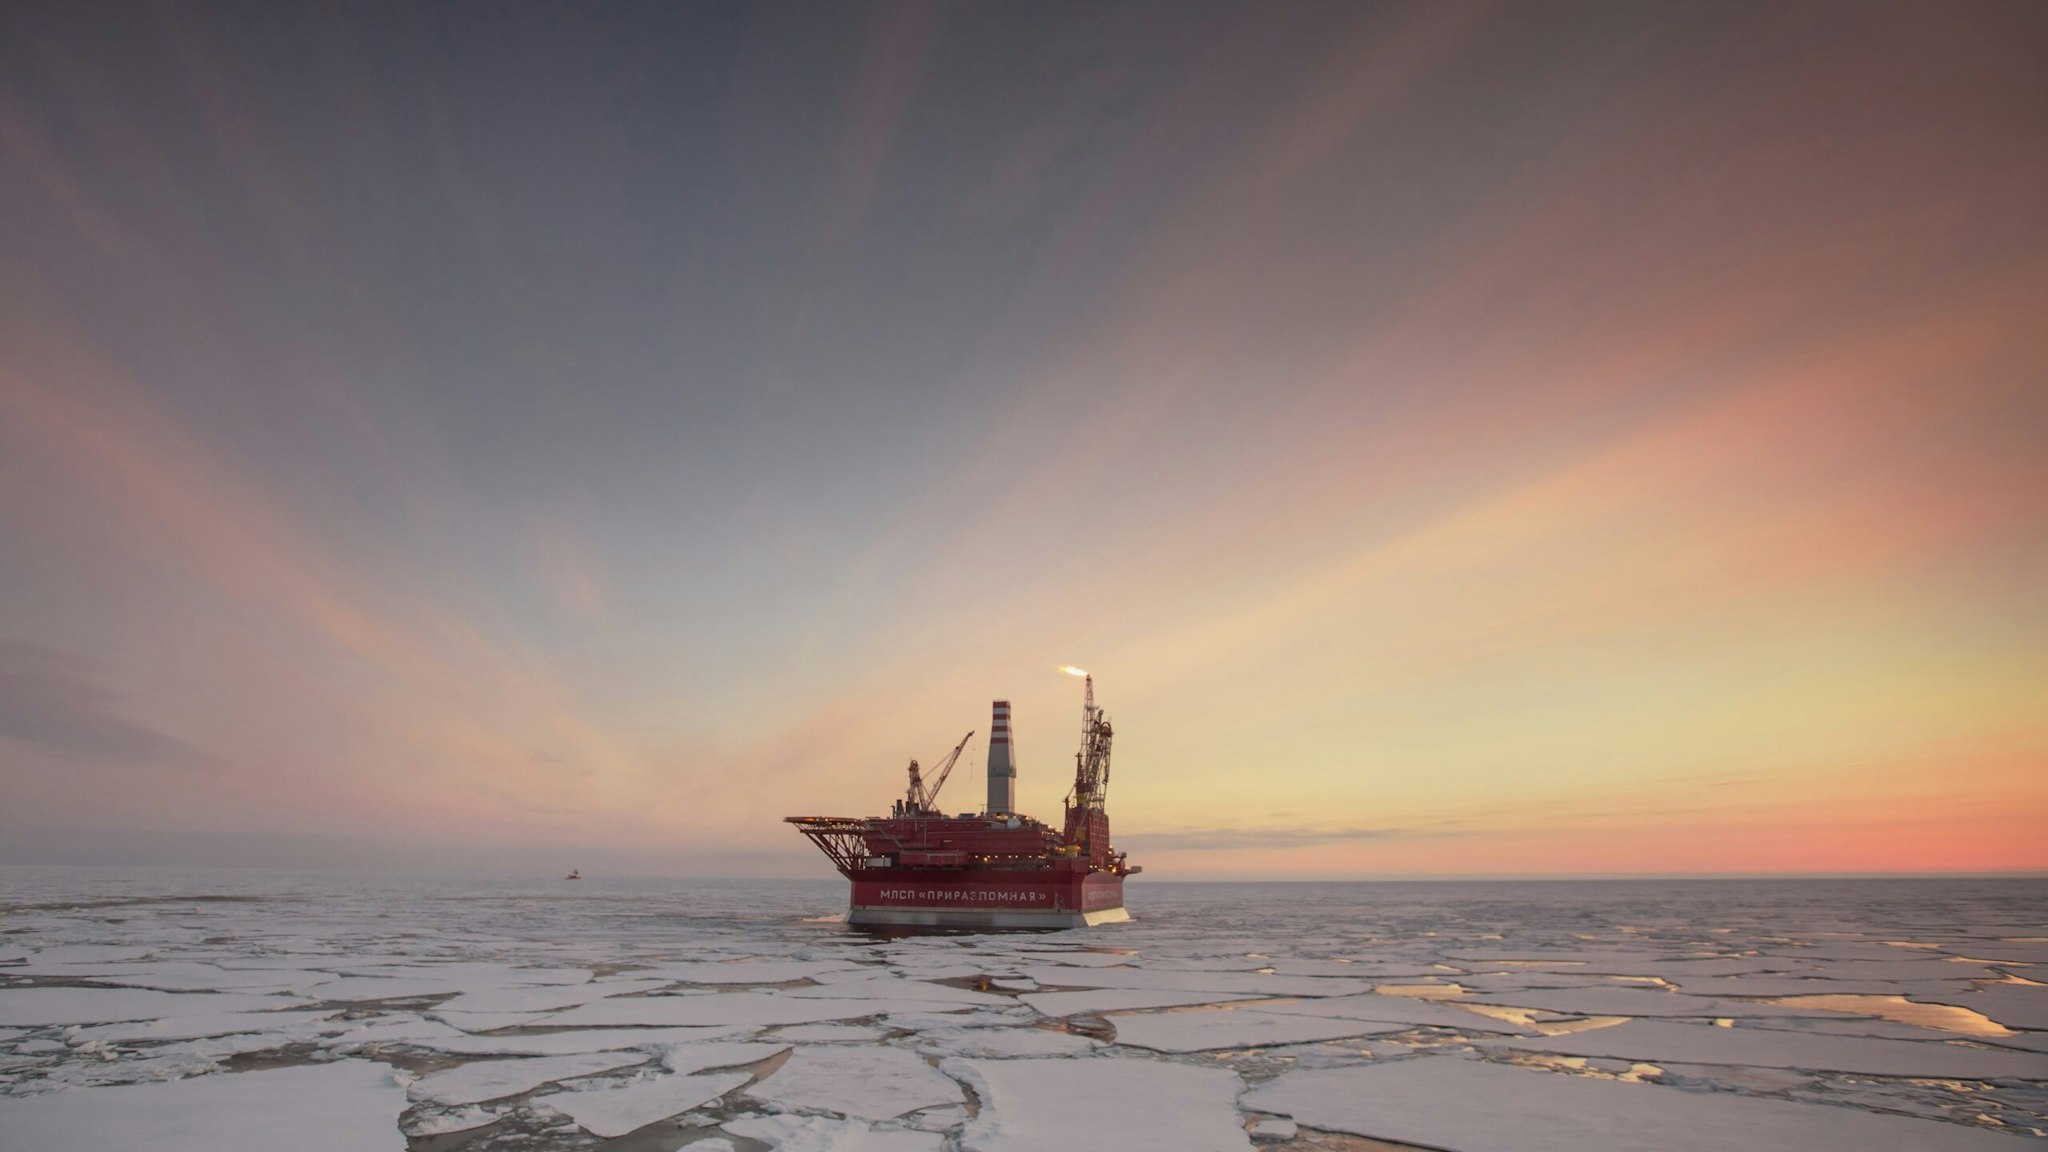 A Russian oil company claims it has found an enormous oil field under Arctic waters in the Pechora Sea.